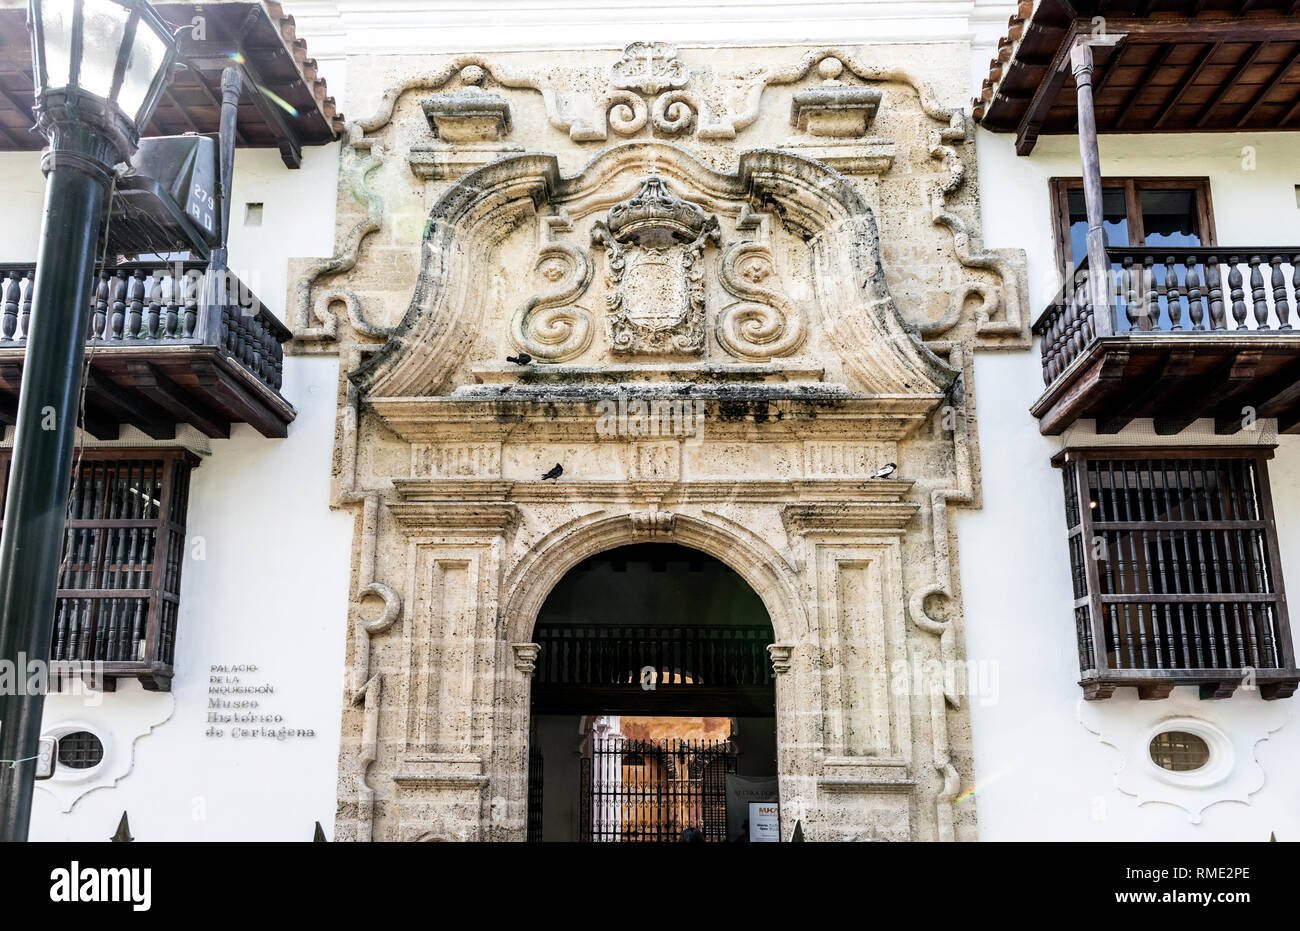 The Palace Of The Inquisition Cartagena Colombia South America Stock Photo